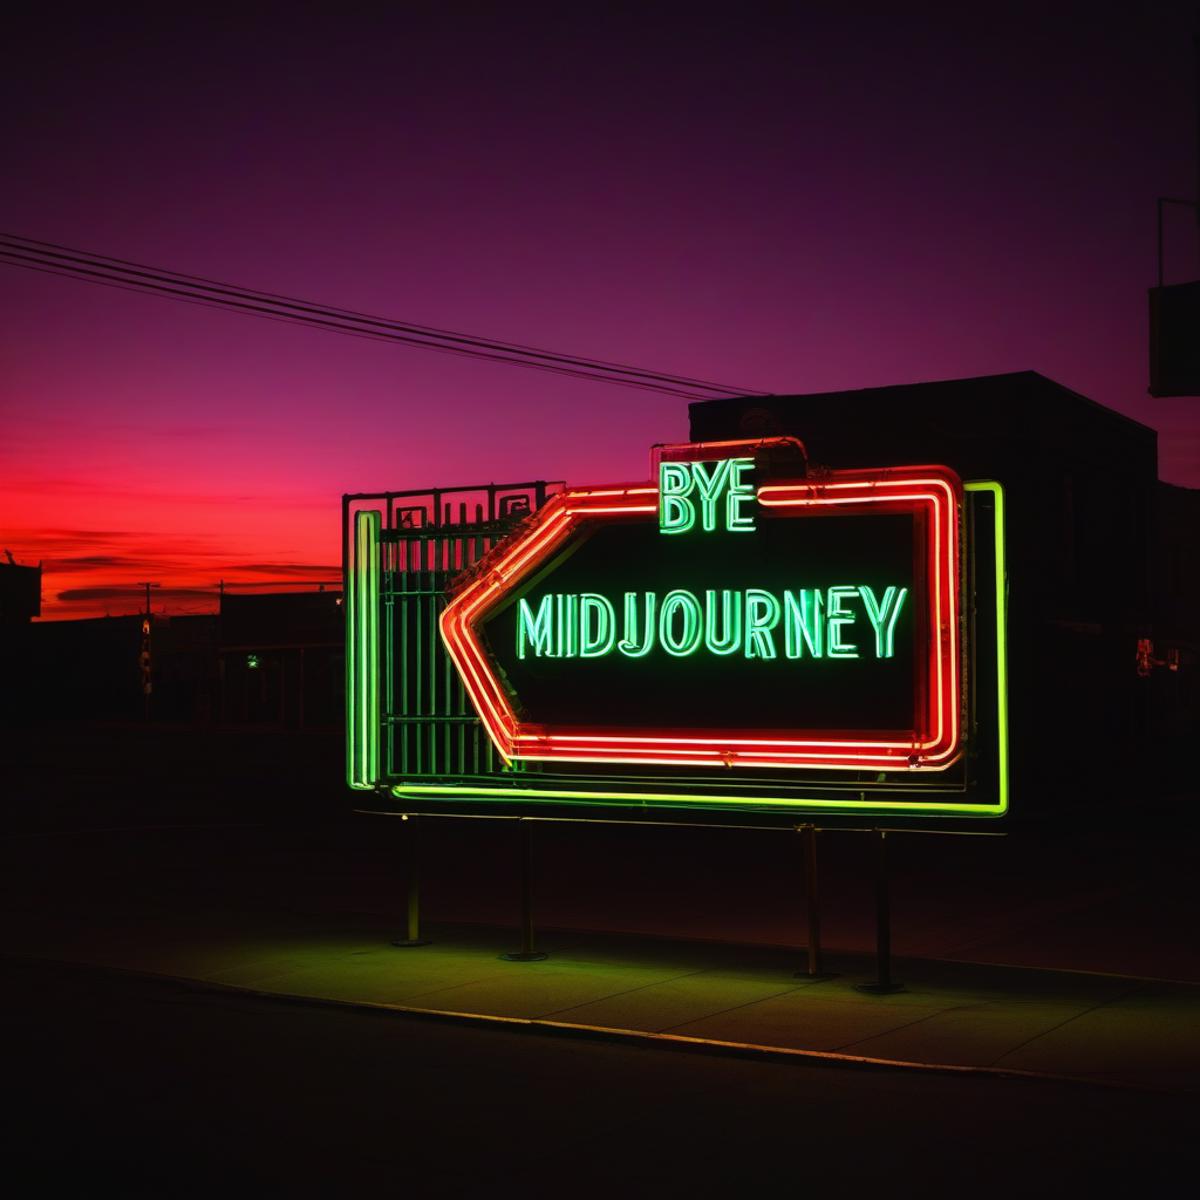 A neon sign that says "Bye Mid Journey" sits on a sidewalk.